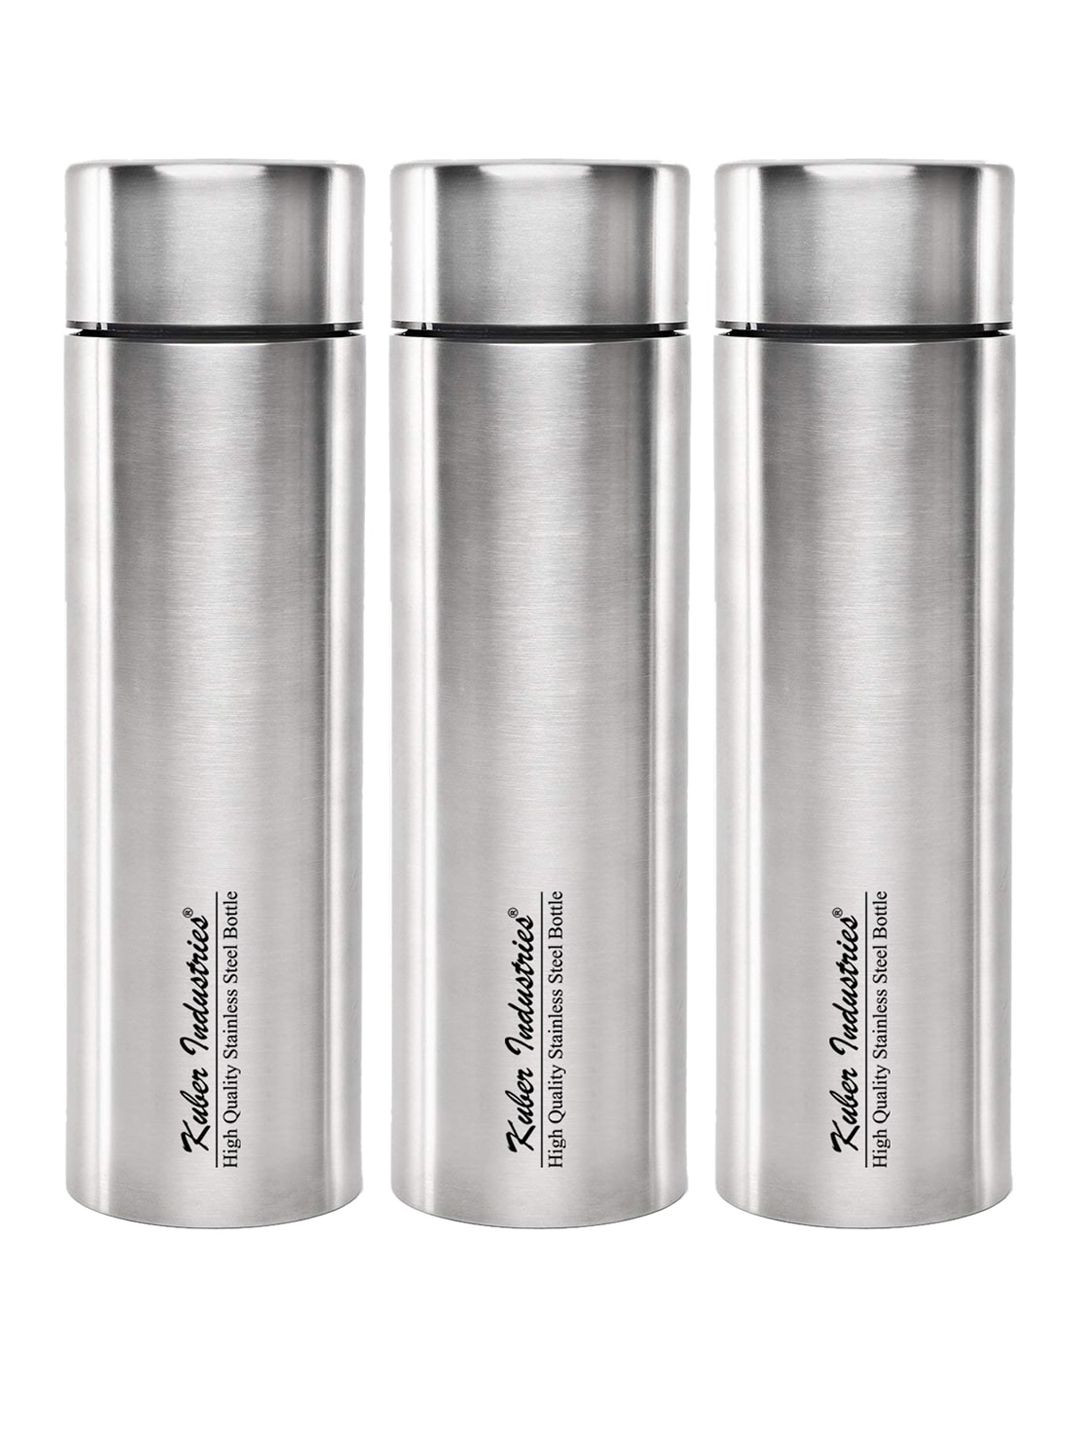 Kuber Industries Set Of 3 Silver-Toned Stainless Steel Water Bottle 1000 Ml Price in India